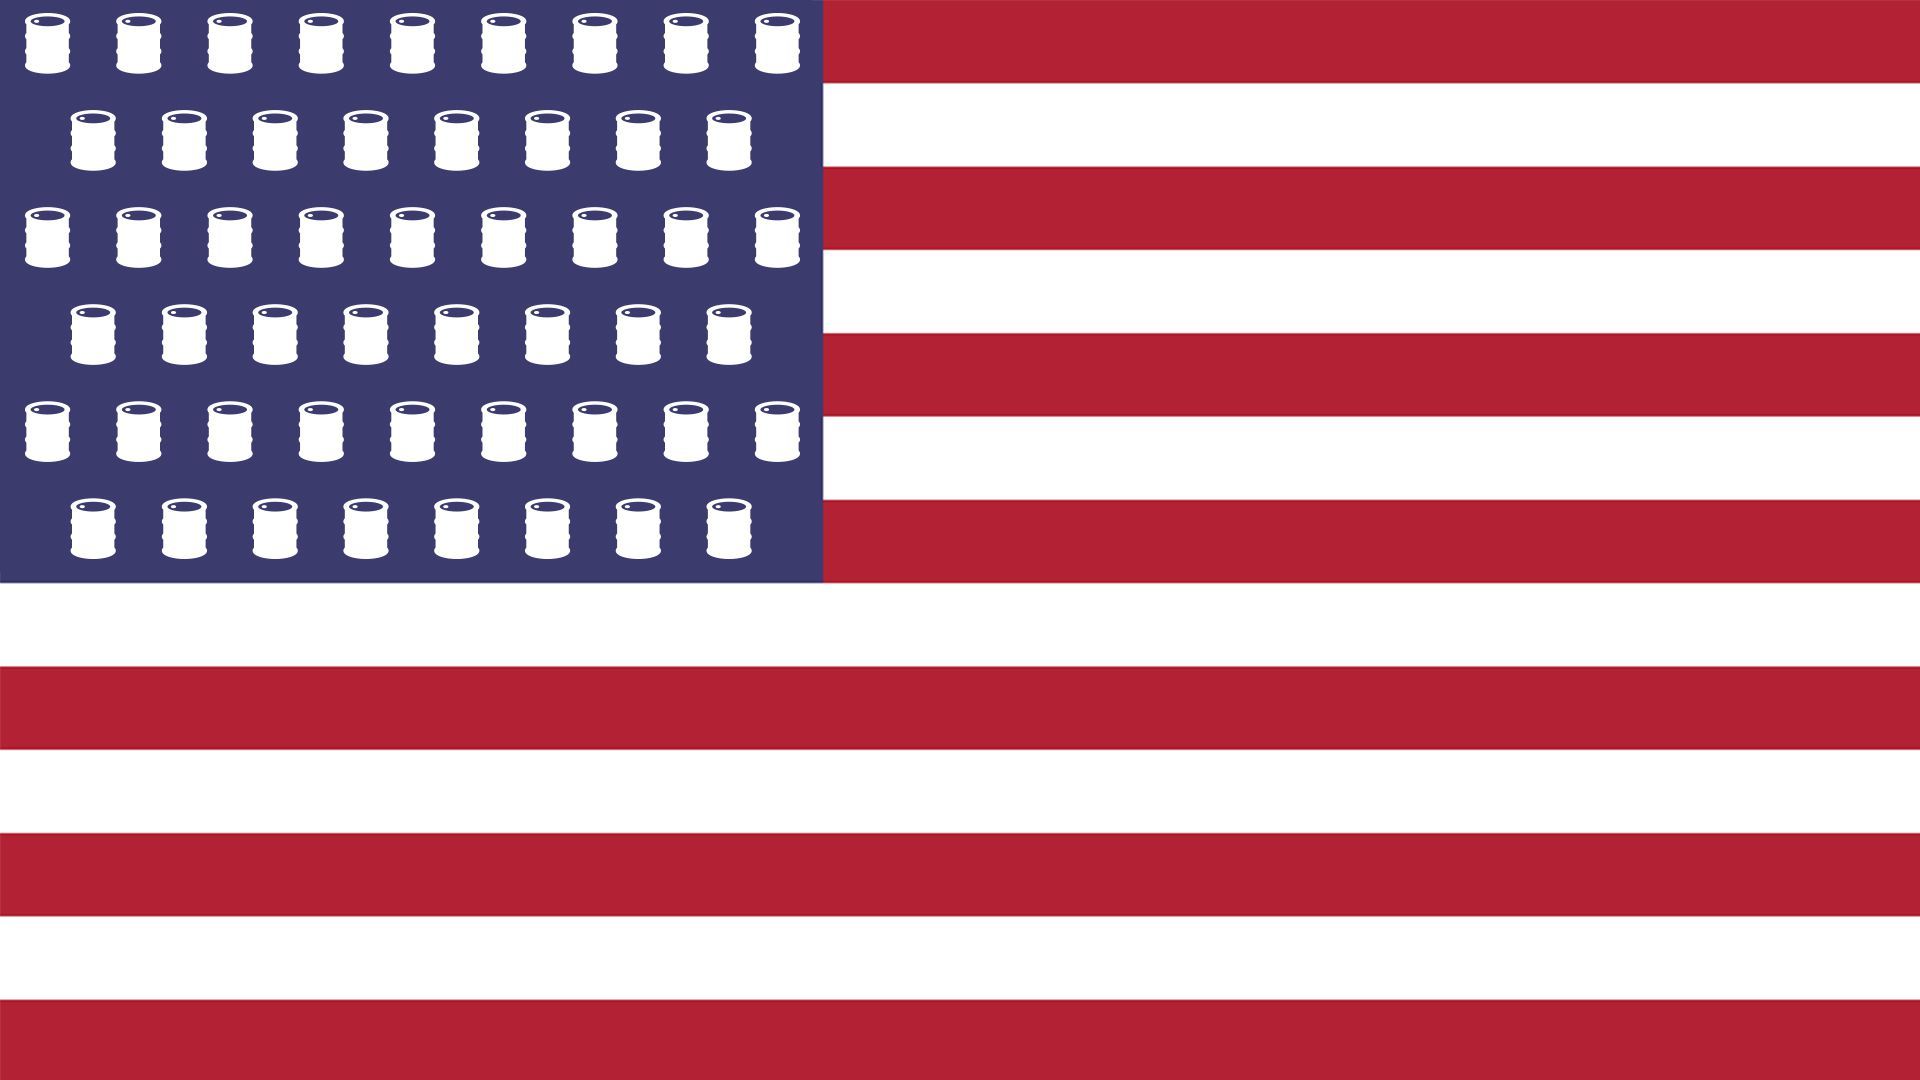 Illustration of an American flag with oil barrels instead of stars